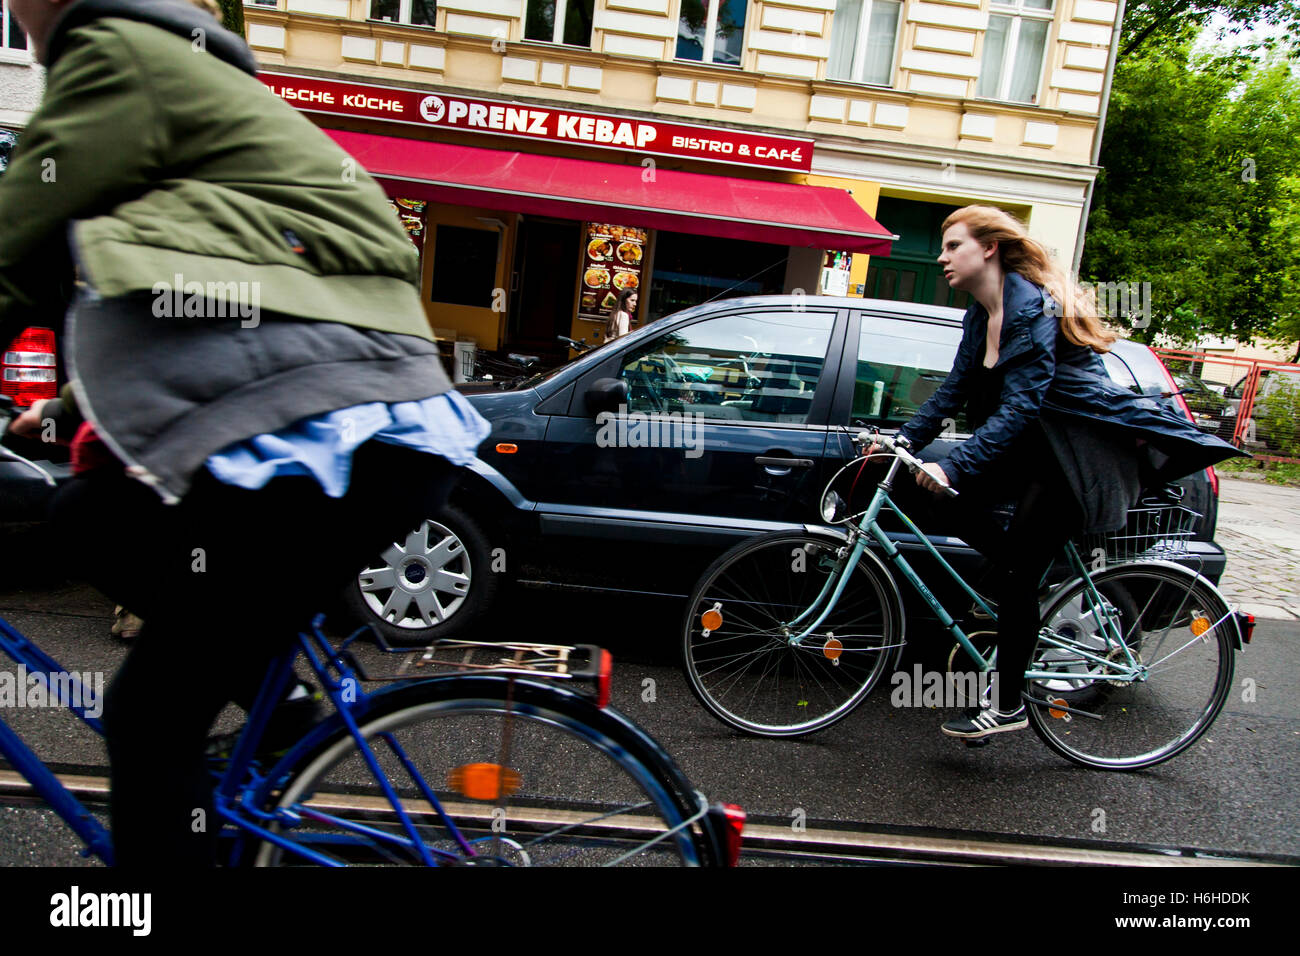 BERLIN - JUNE 16: Cyclers in the street on an inclement day on June 16, 2012 in Berlin, Germany. Stock Photo